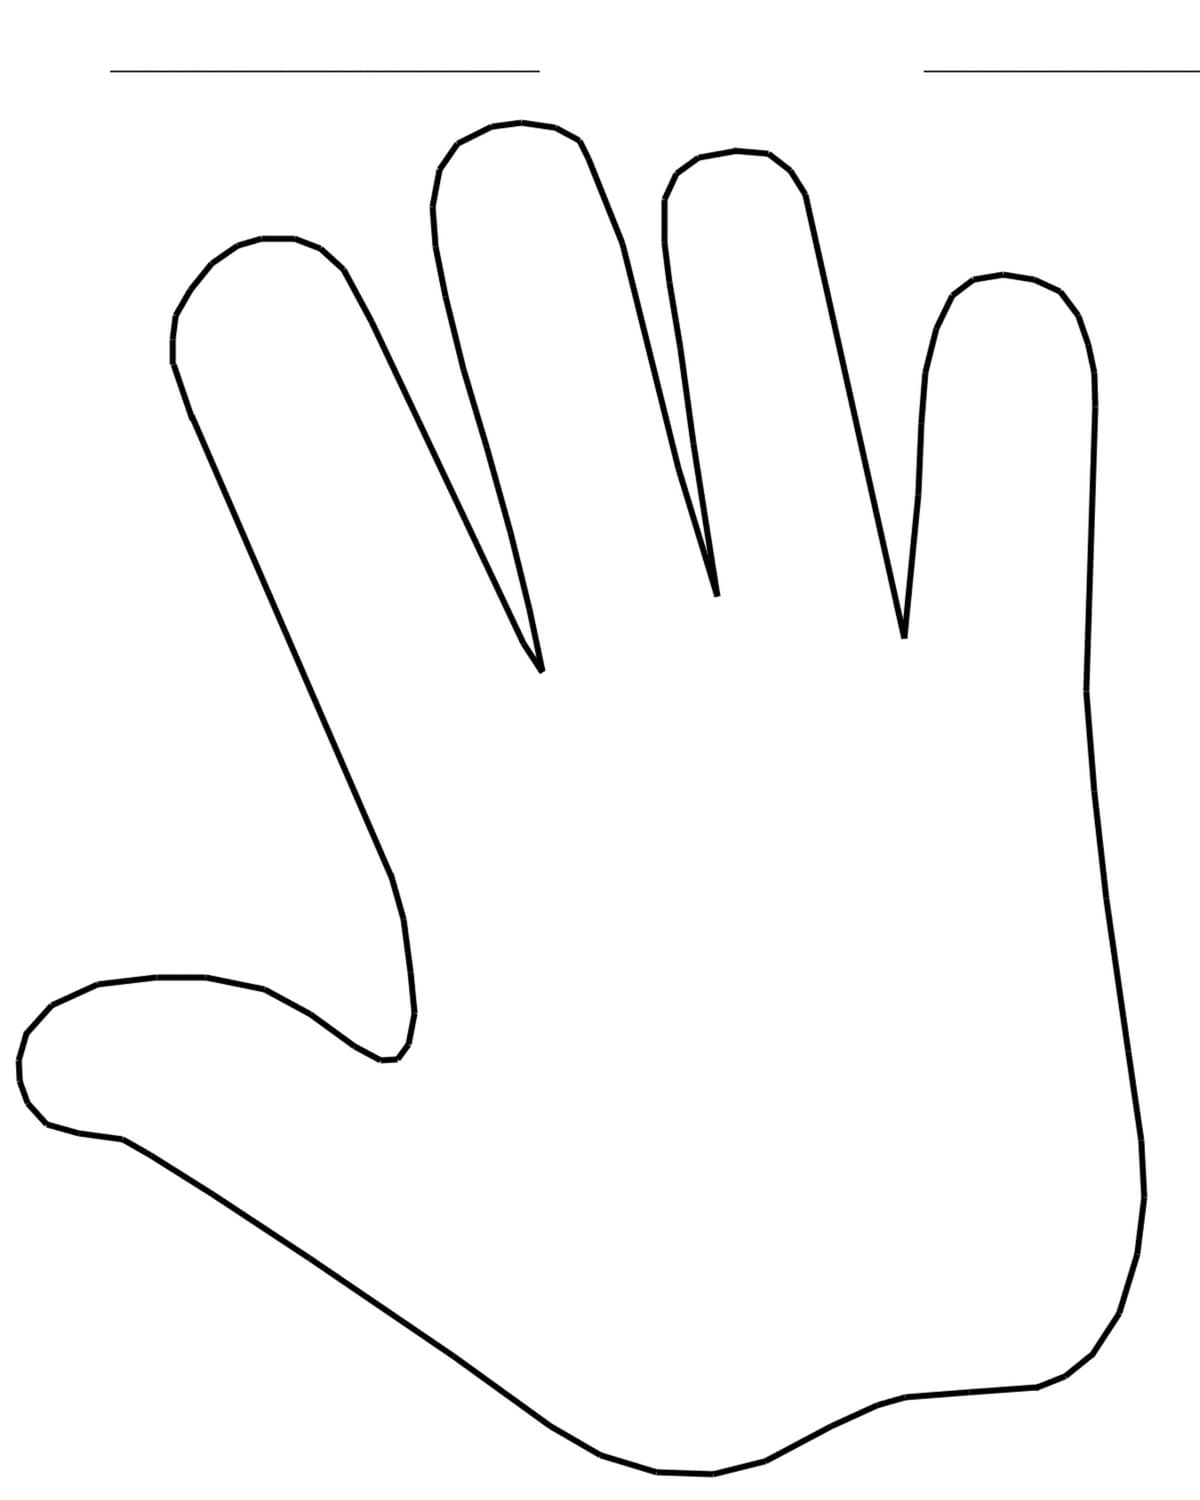 right hand outline template